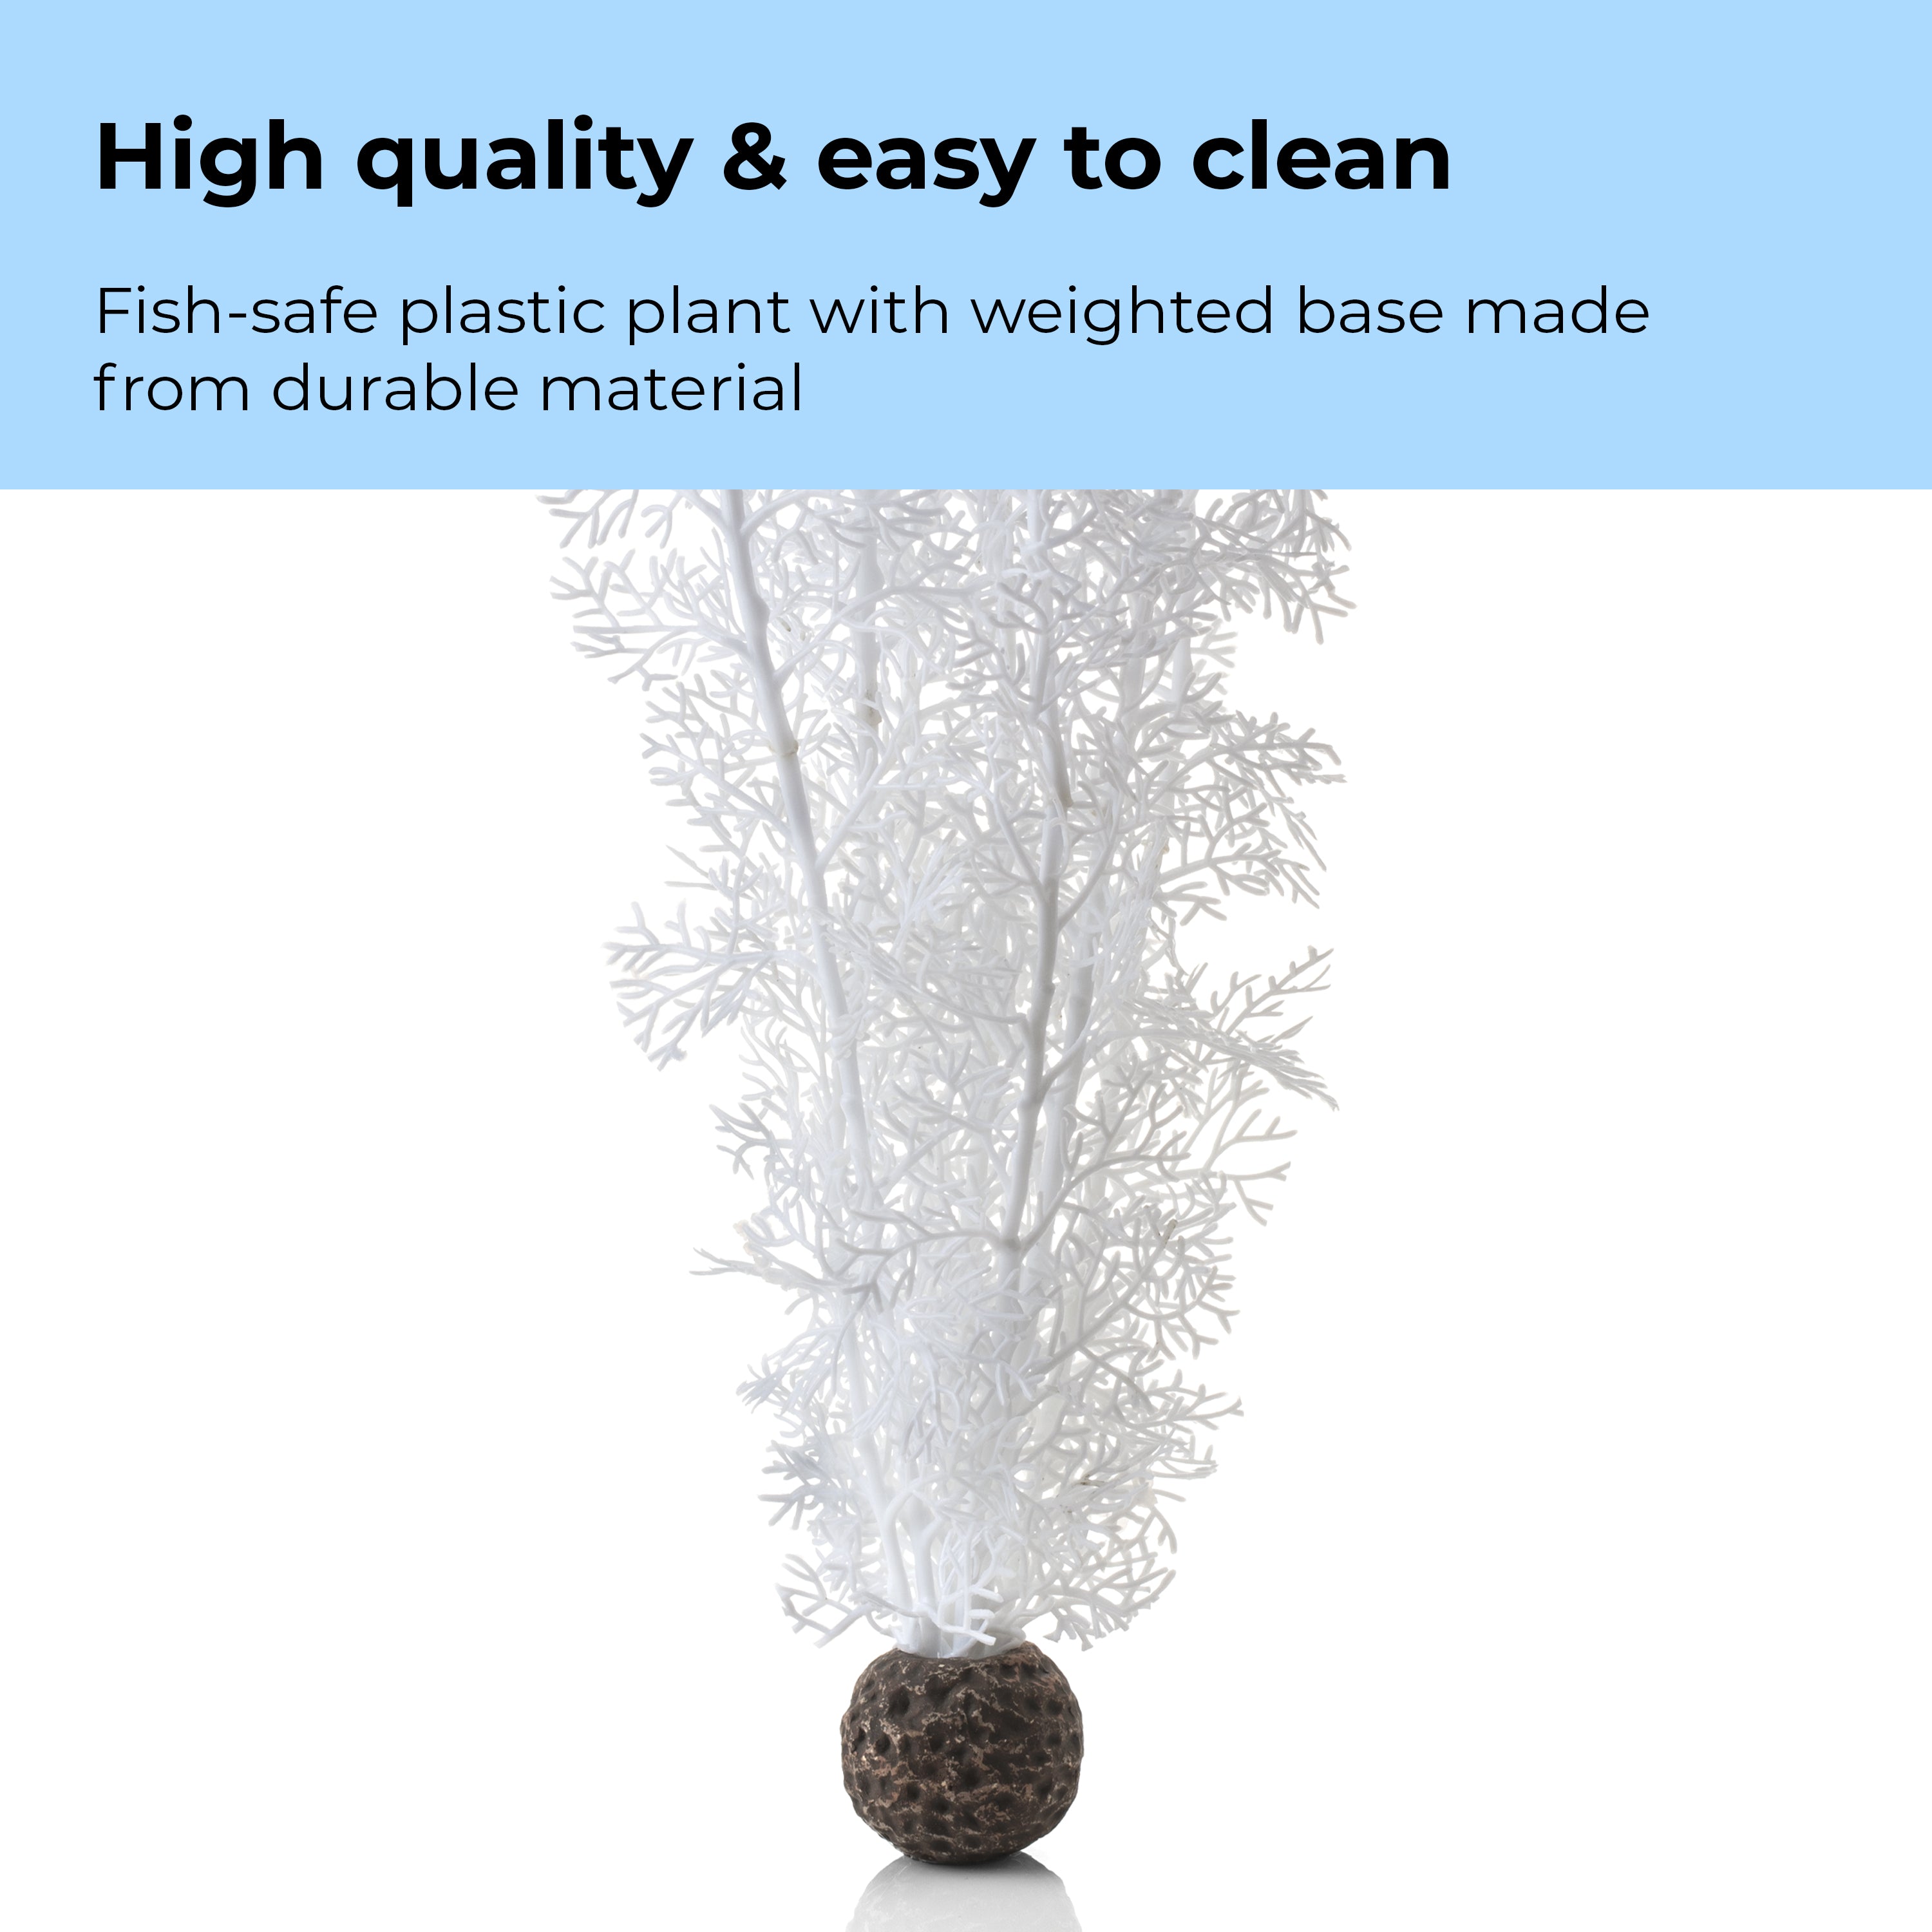 Extra Large Sea Fan - High quality & easy to clean